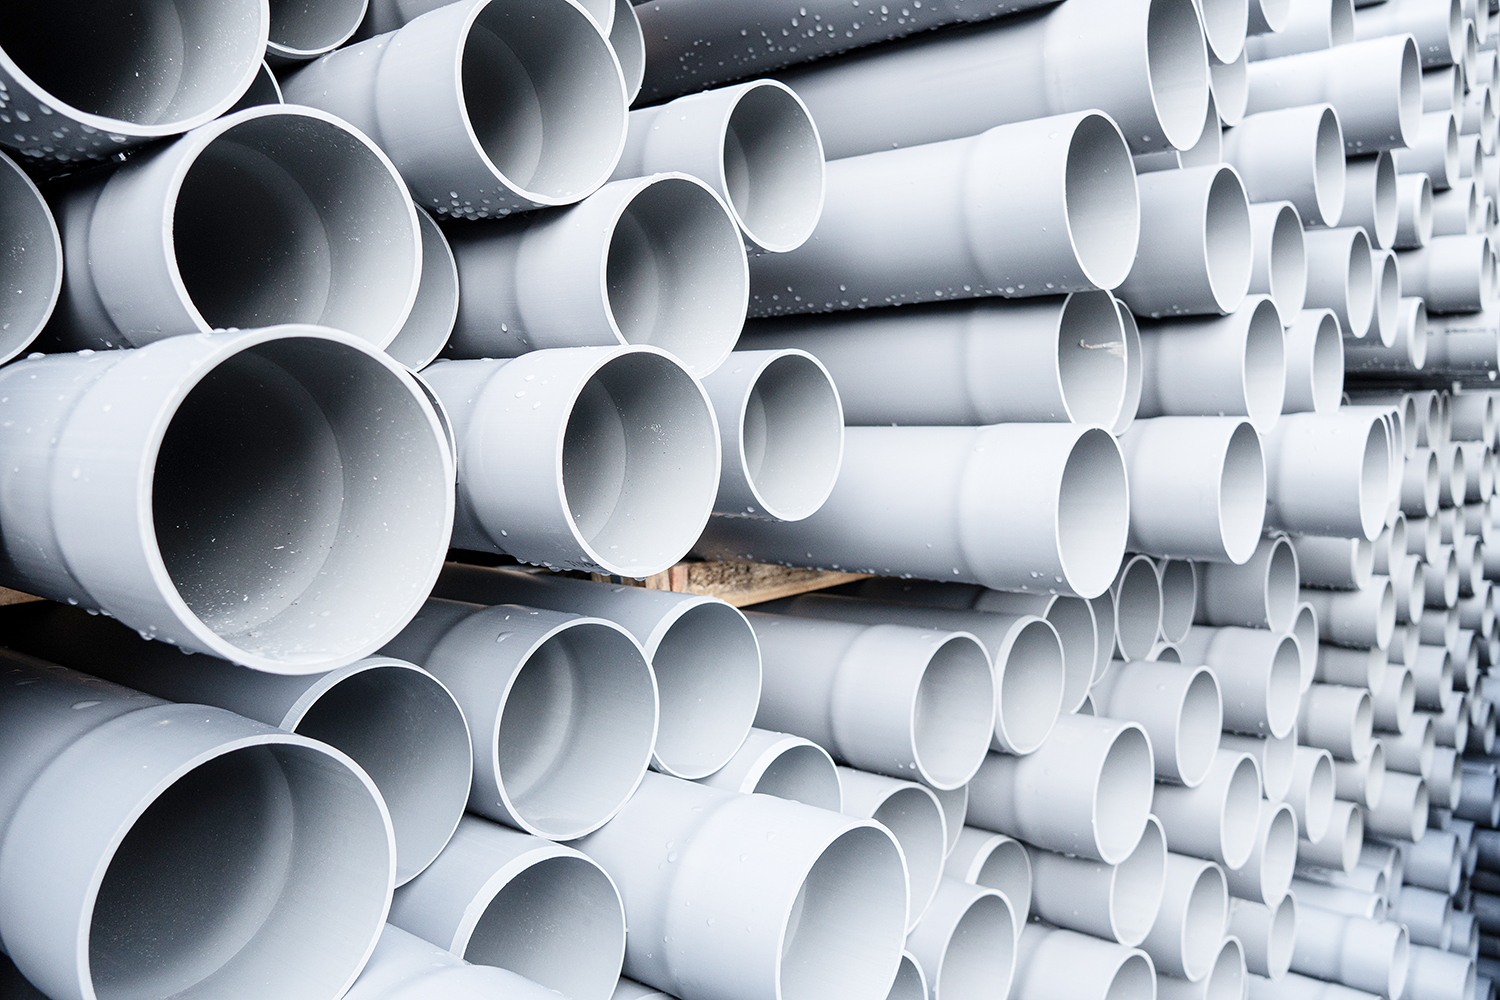 Gray PVC tubes plastic pipes stacked in rows